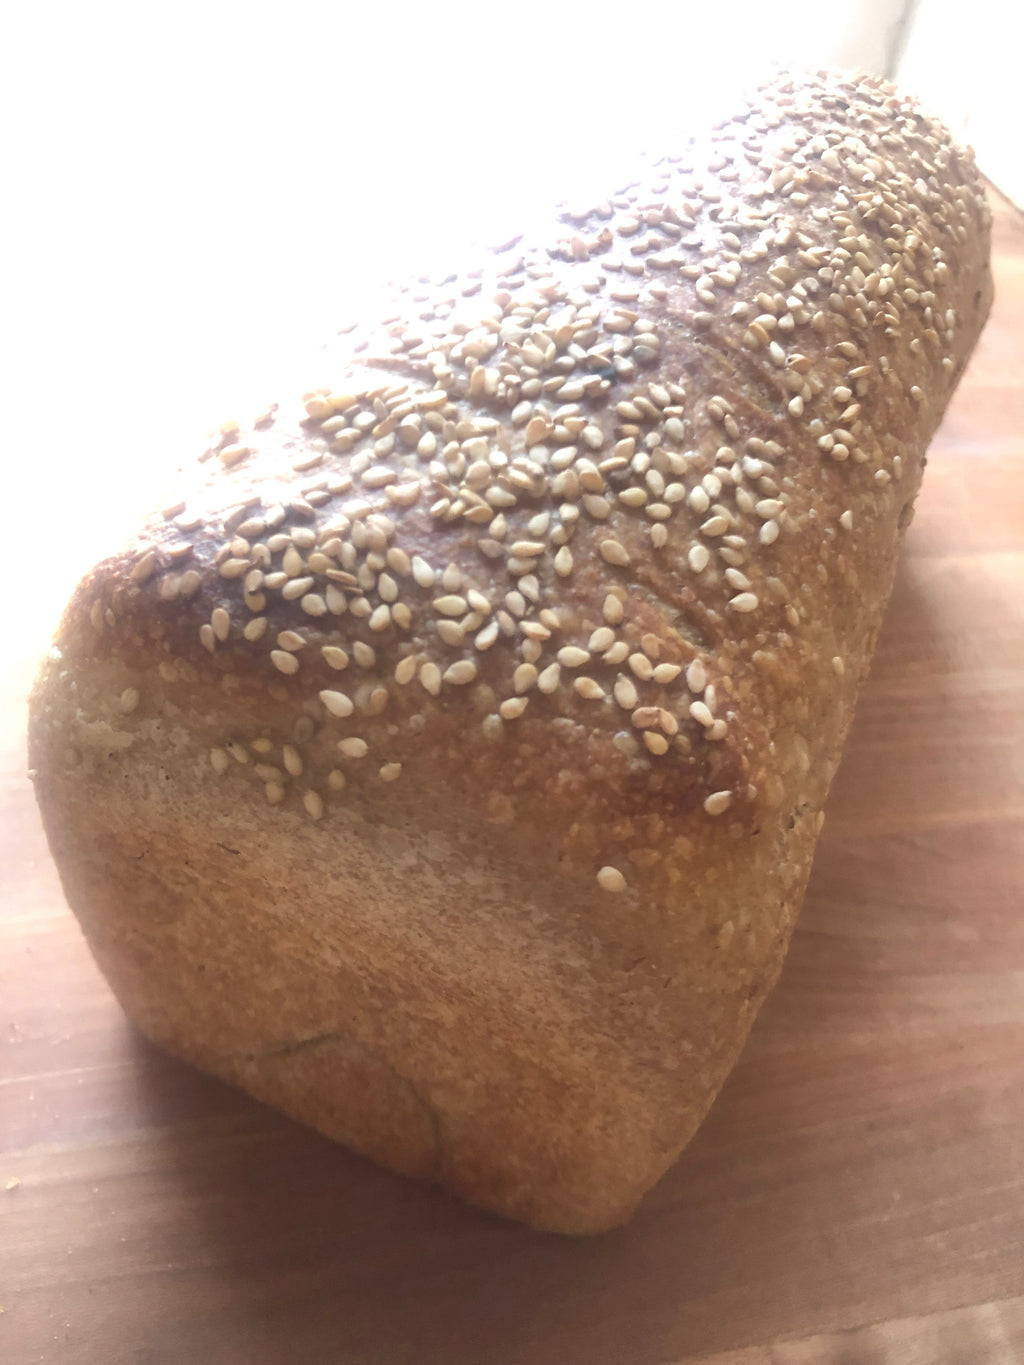 WED MAY 1st sourdough sandwich bread - Porch Pick up 4-9pm  OR Purplebrown Farm Store 4:30-6